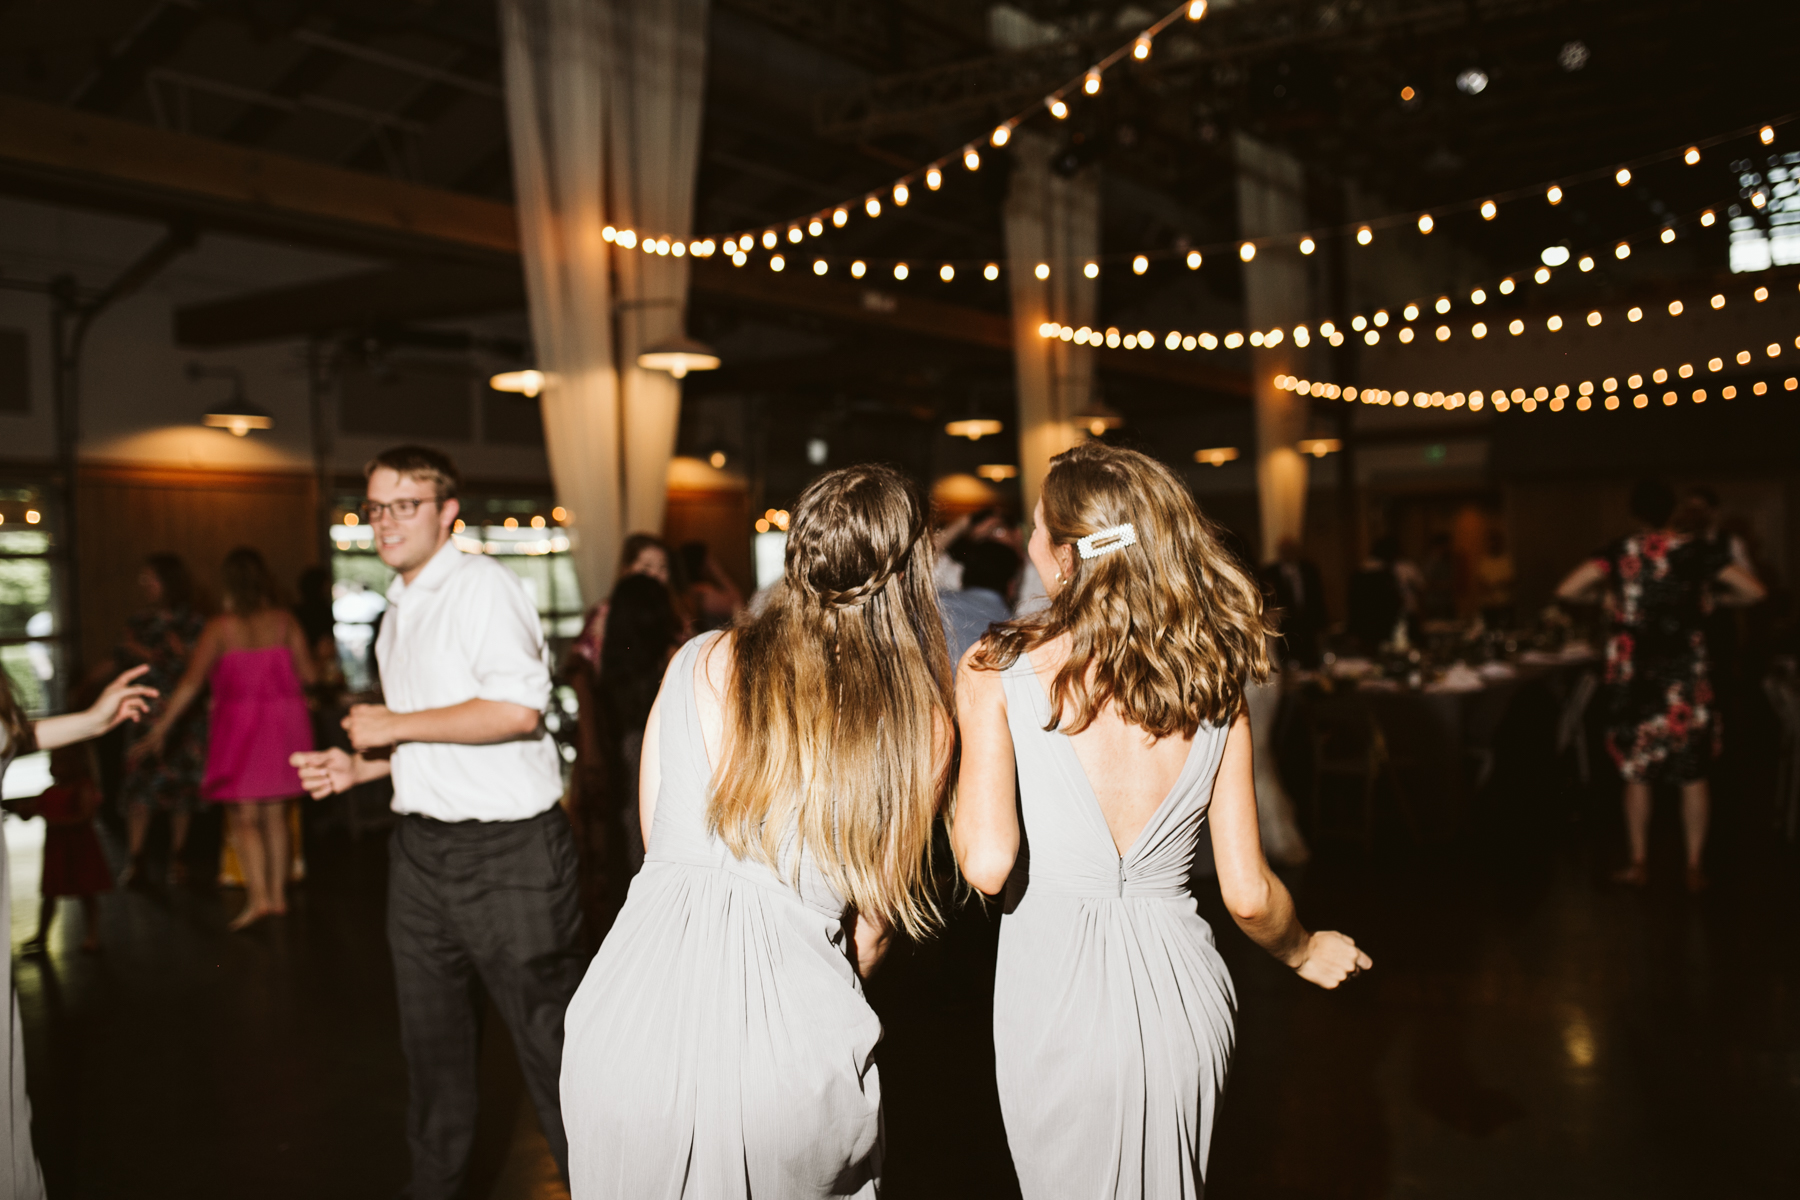 Wedding reception at the loveless cafe and barn in nashville, tennessee